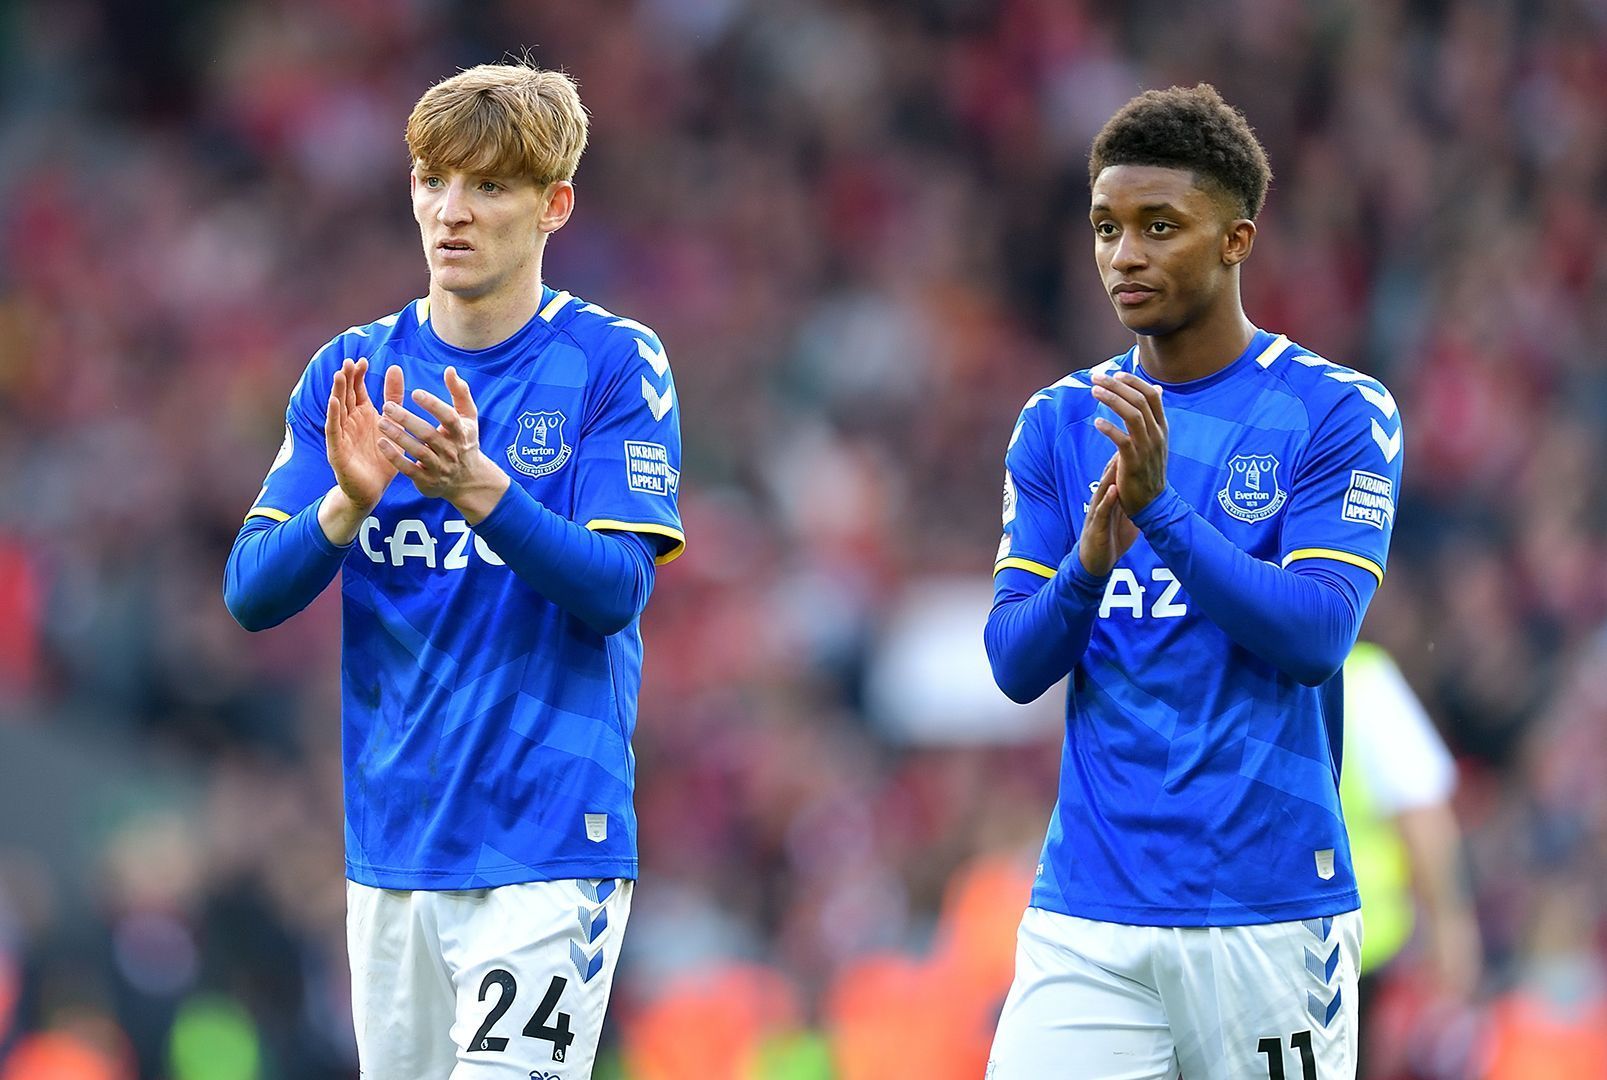 The Toffees have dropped into the relegation zone after losing to Liverpool